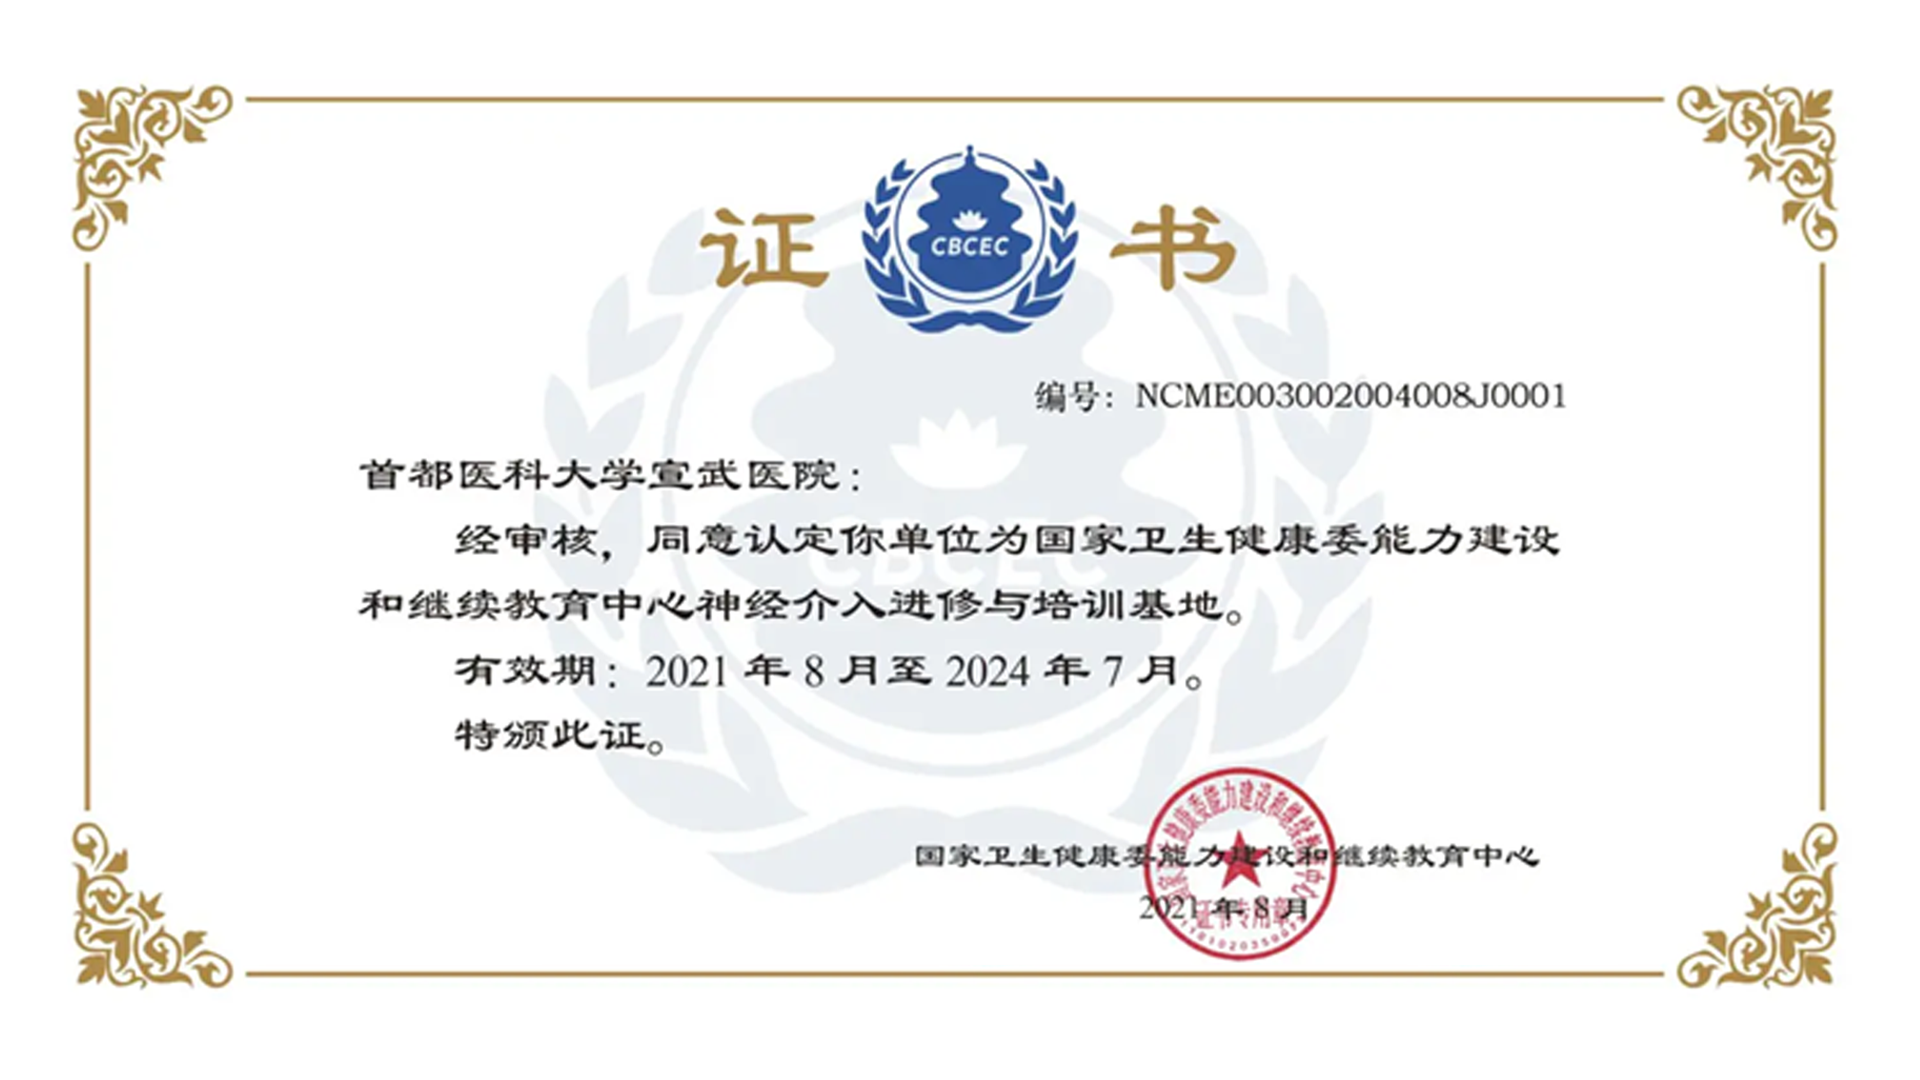 Xuanwu neurosurgery was recognized as one of the first Neuro-intervention training bases of the Department of Health Science, Technology and Education of the National Health Commission